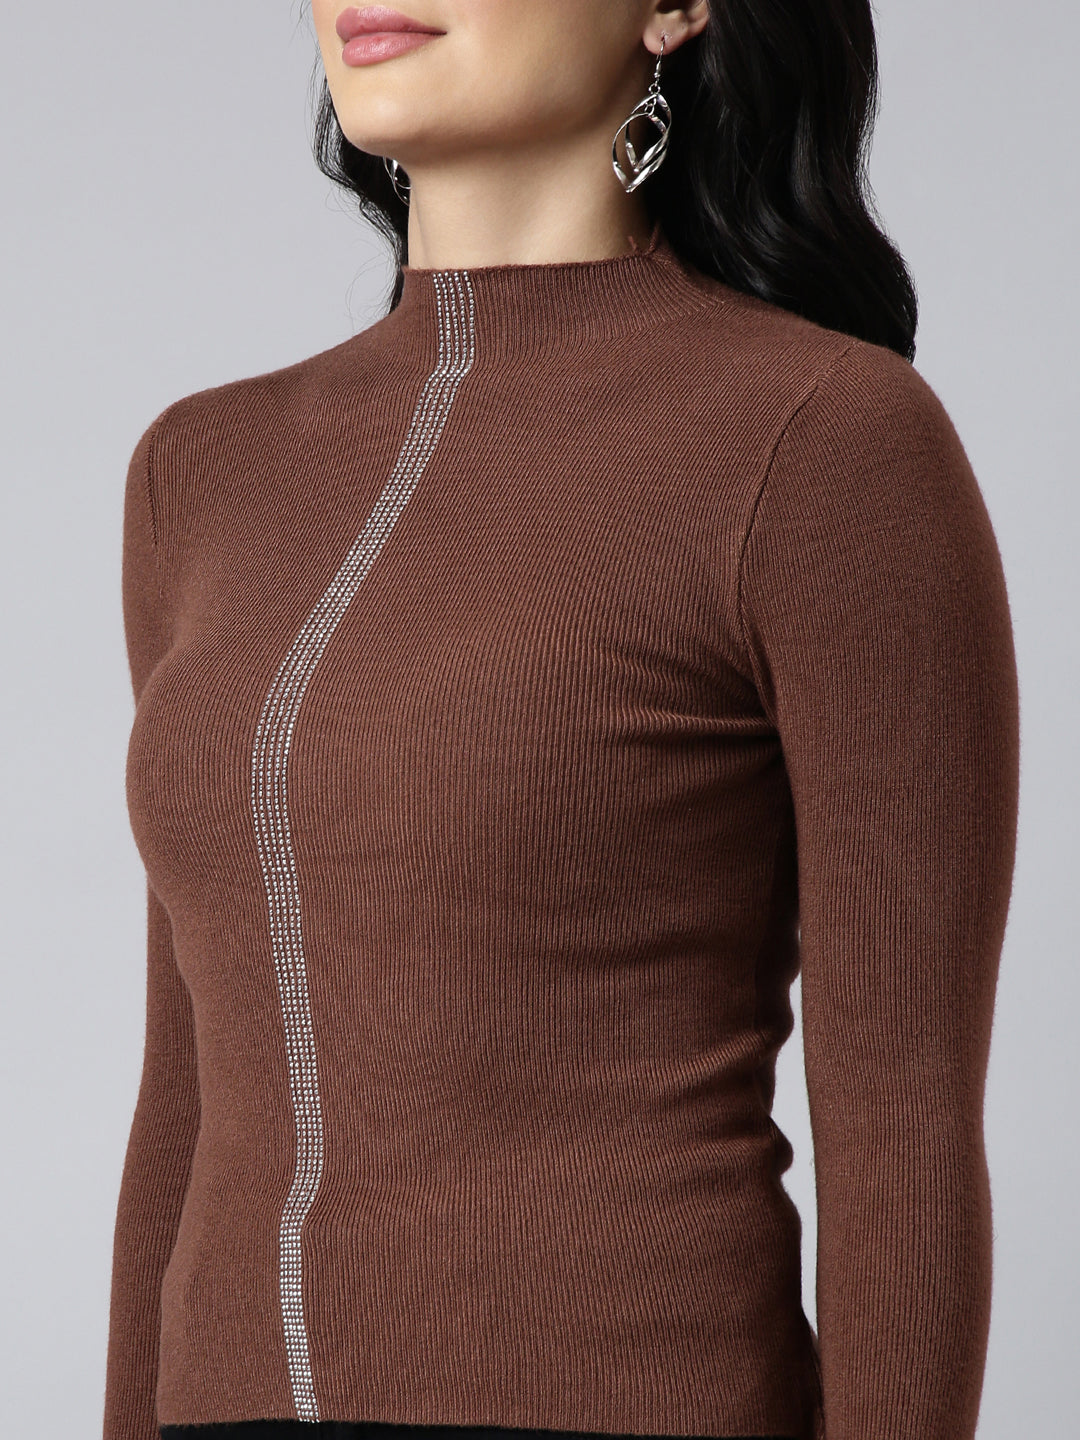 Women Solid Brown Fitted Top